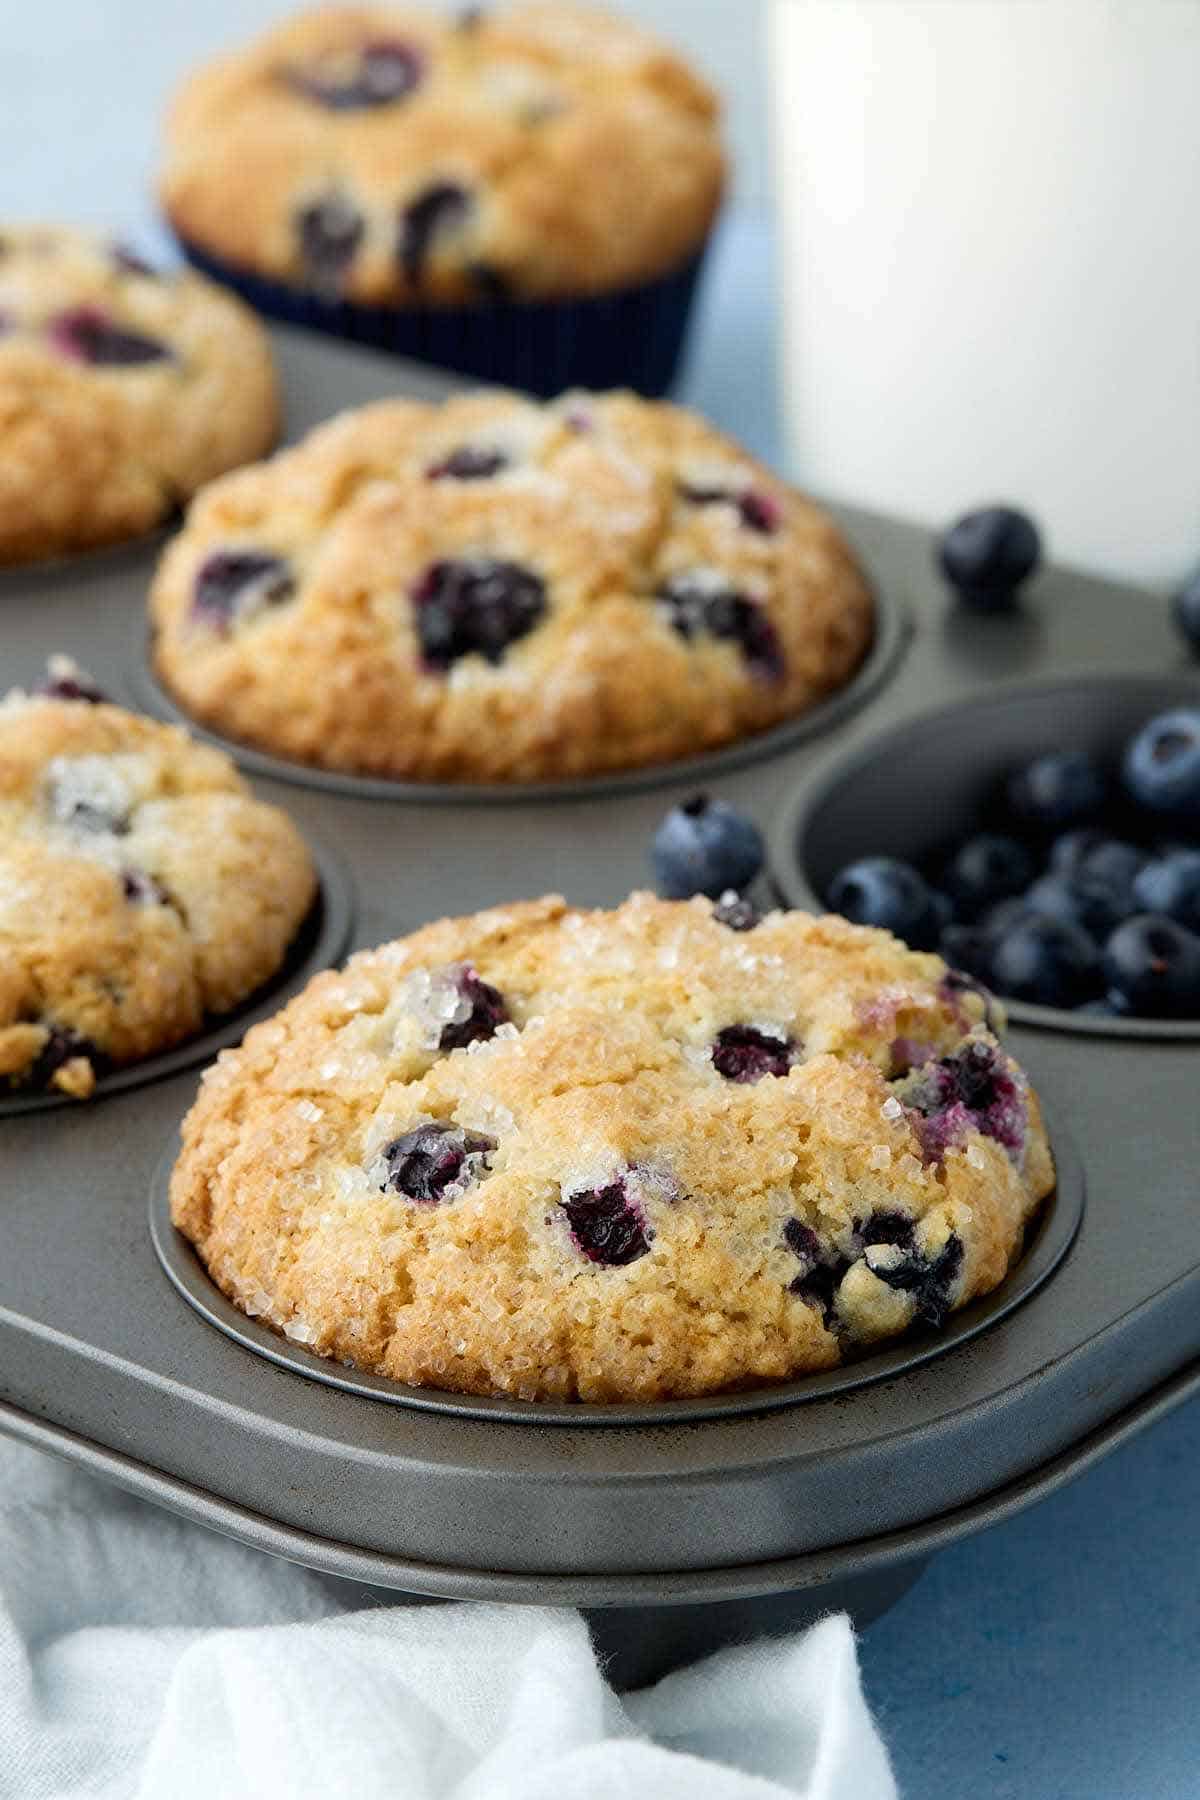 Buttermilk blueberry muffins in a muffin tin with one compartment filled with fresh blueberries.